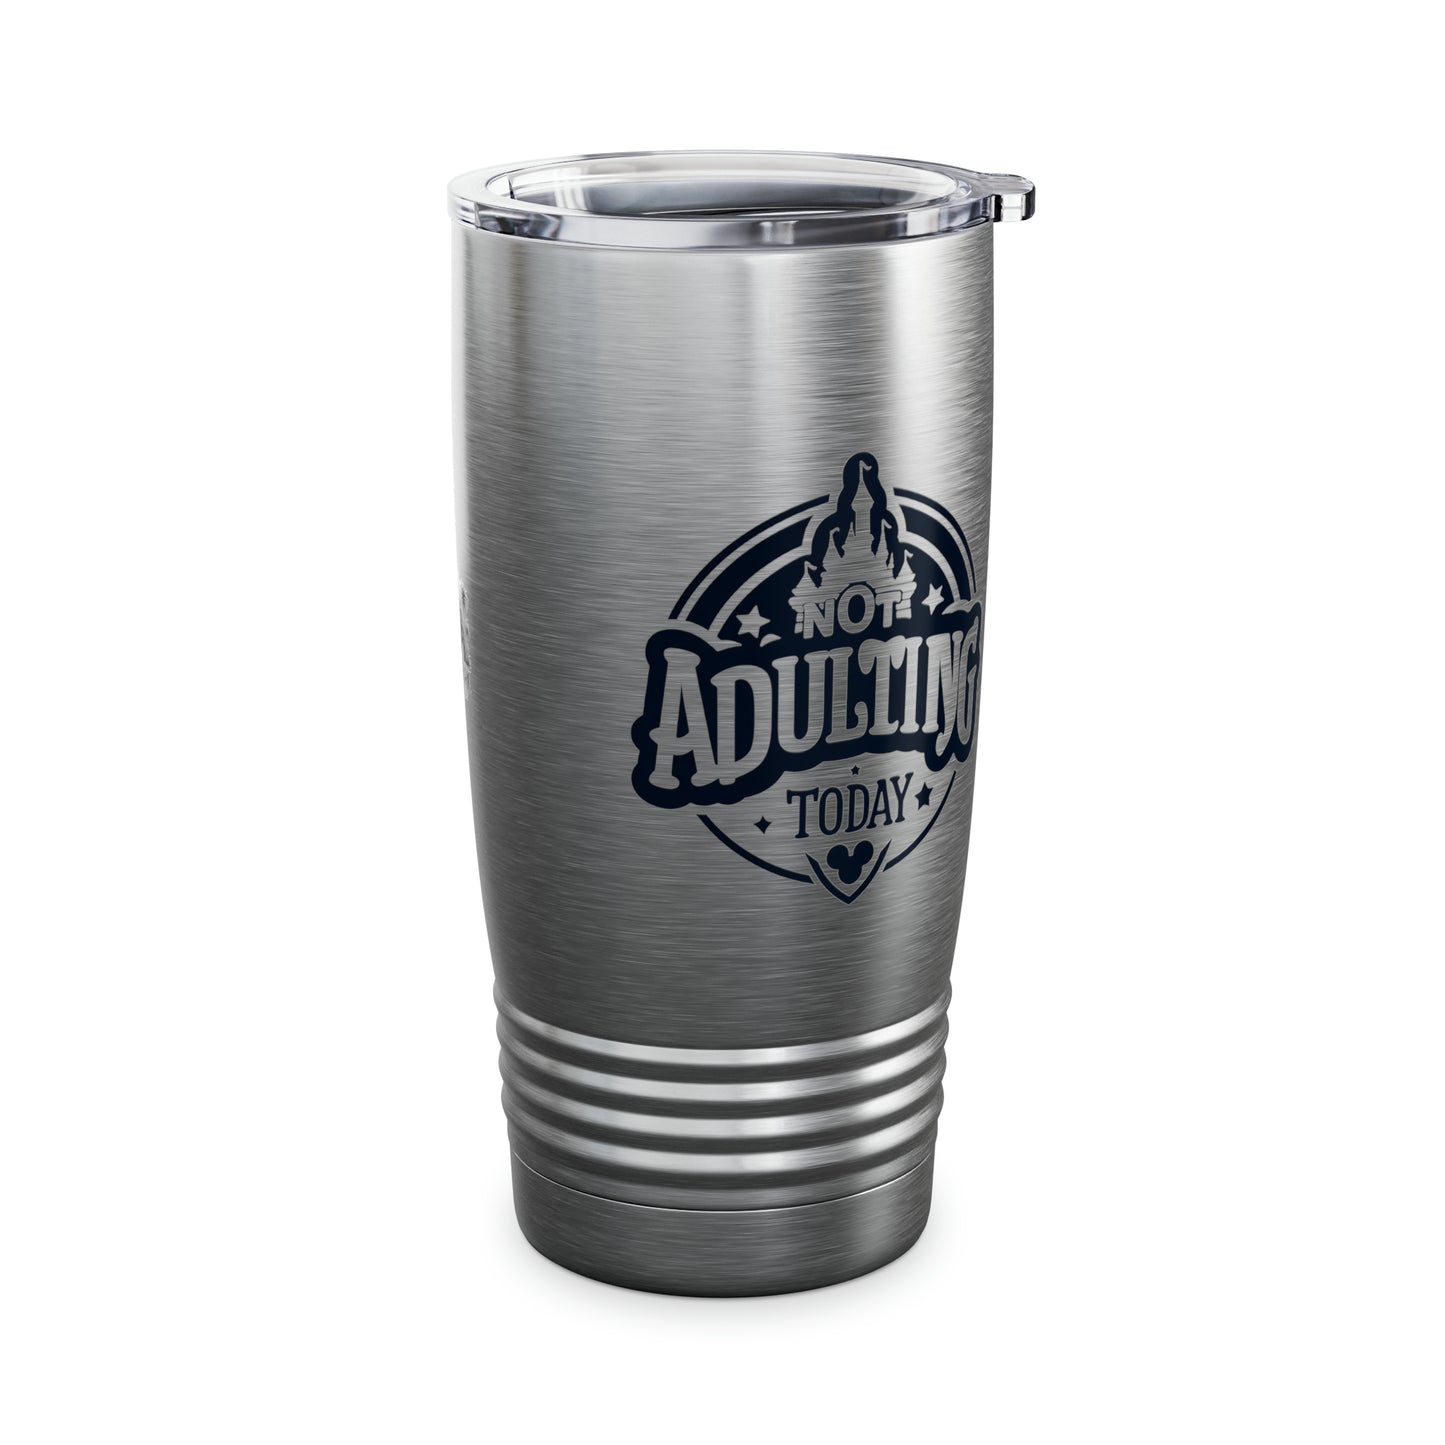 Not Adulting Today Ringneck Tumbler, 20oz